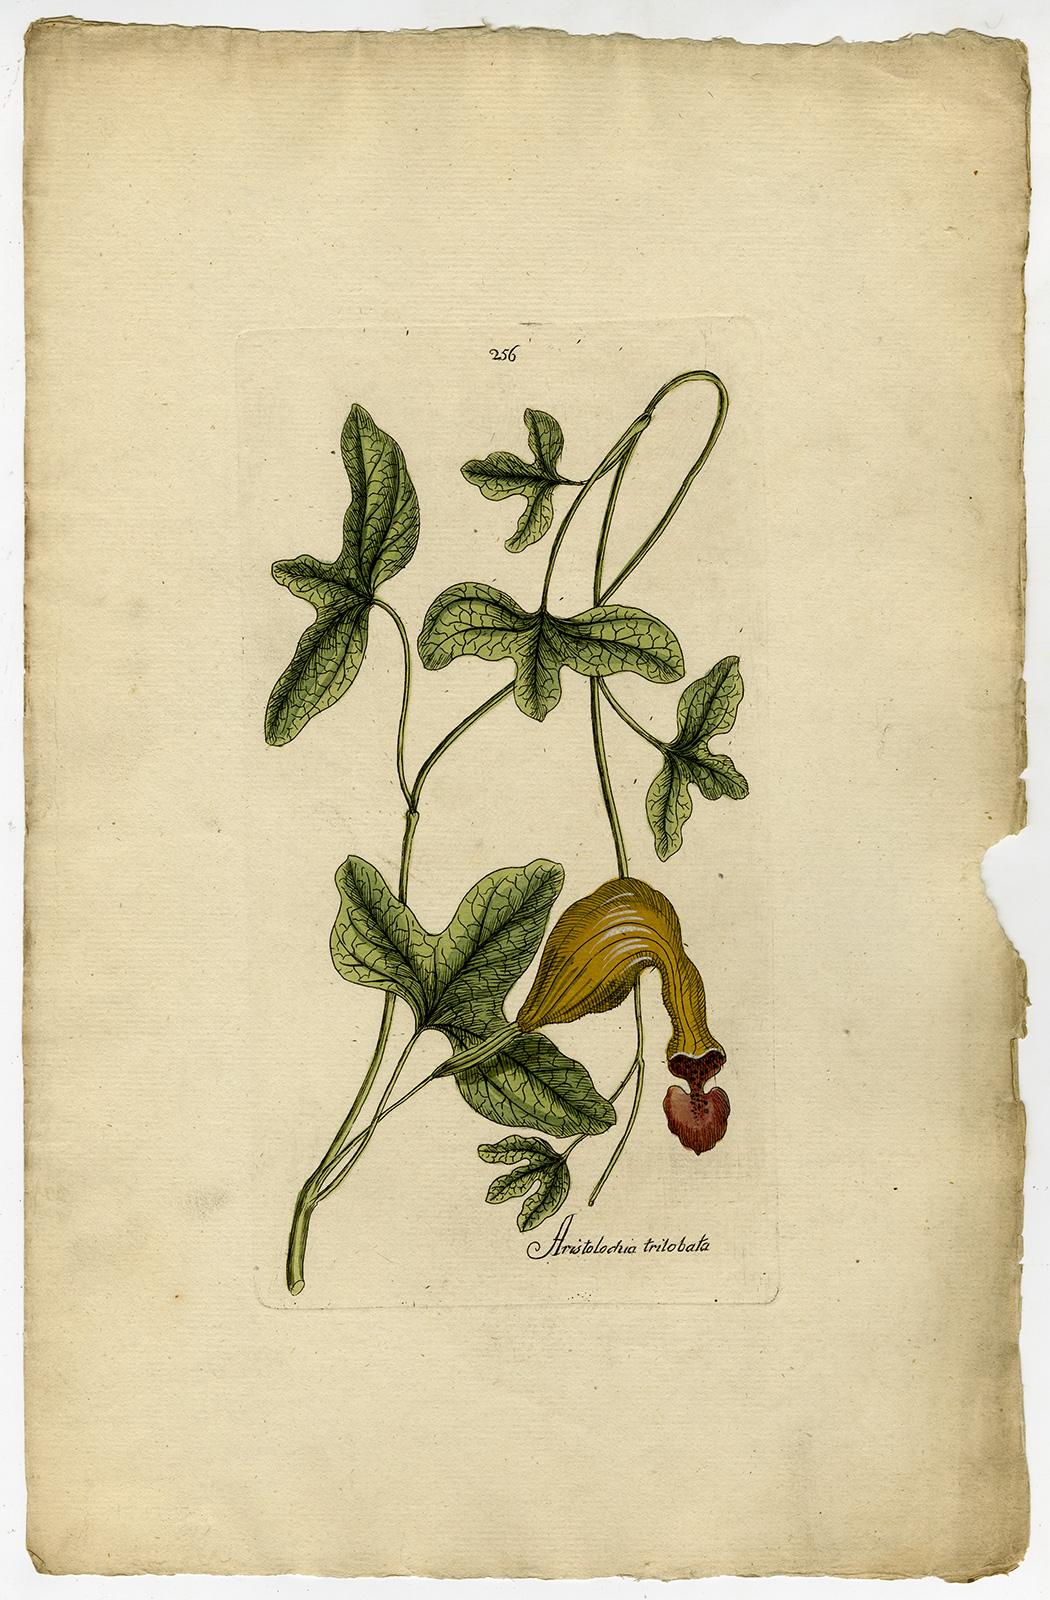 Dutchman's Pipe from Medicinal Plants by Happe - Handcoloured engraving - 18th c - Print by Andreas Friedrich Happe